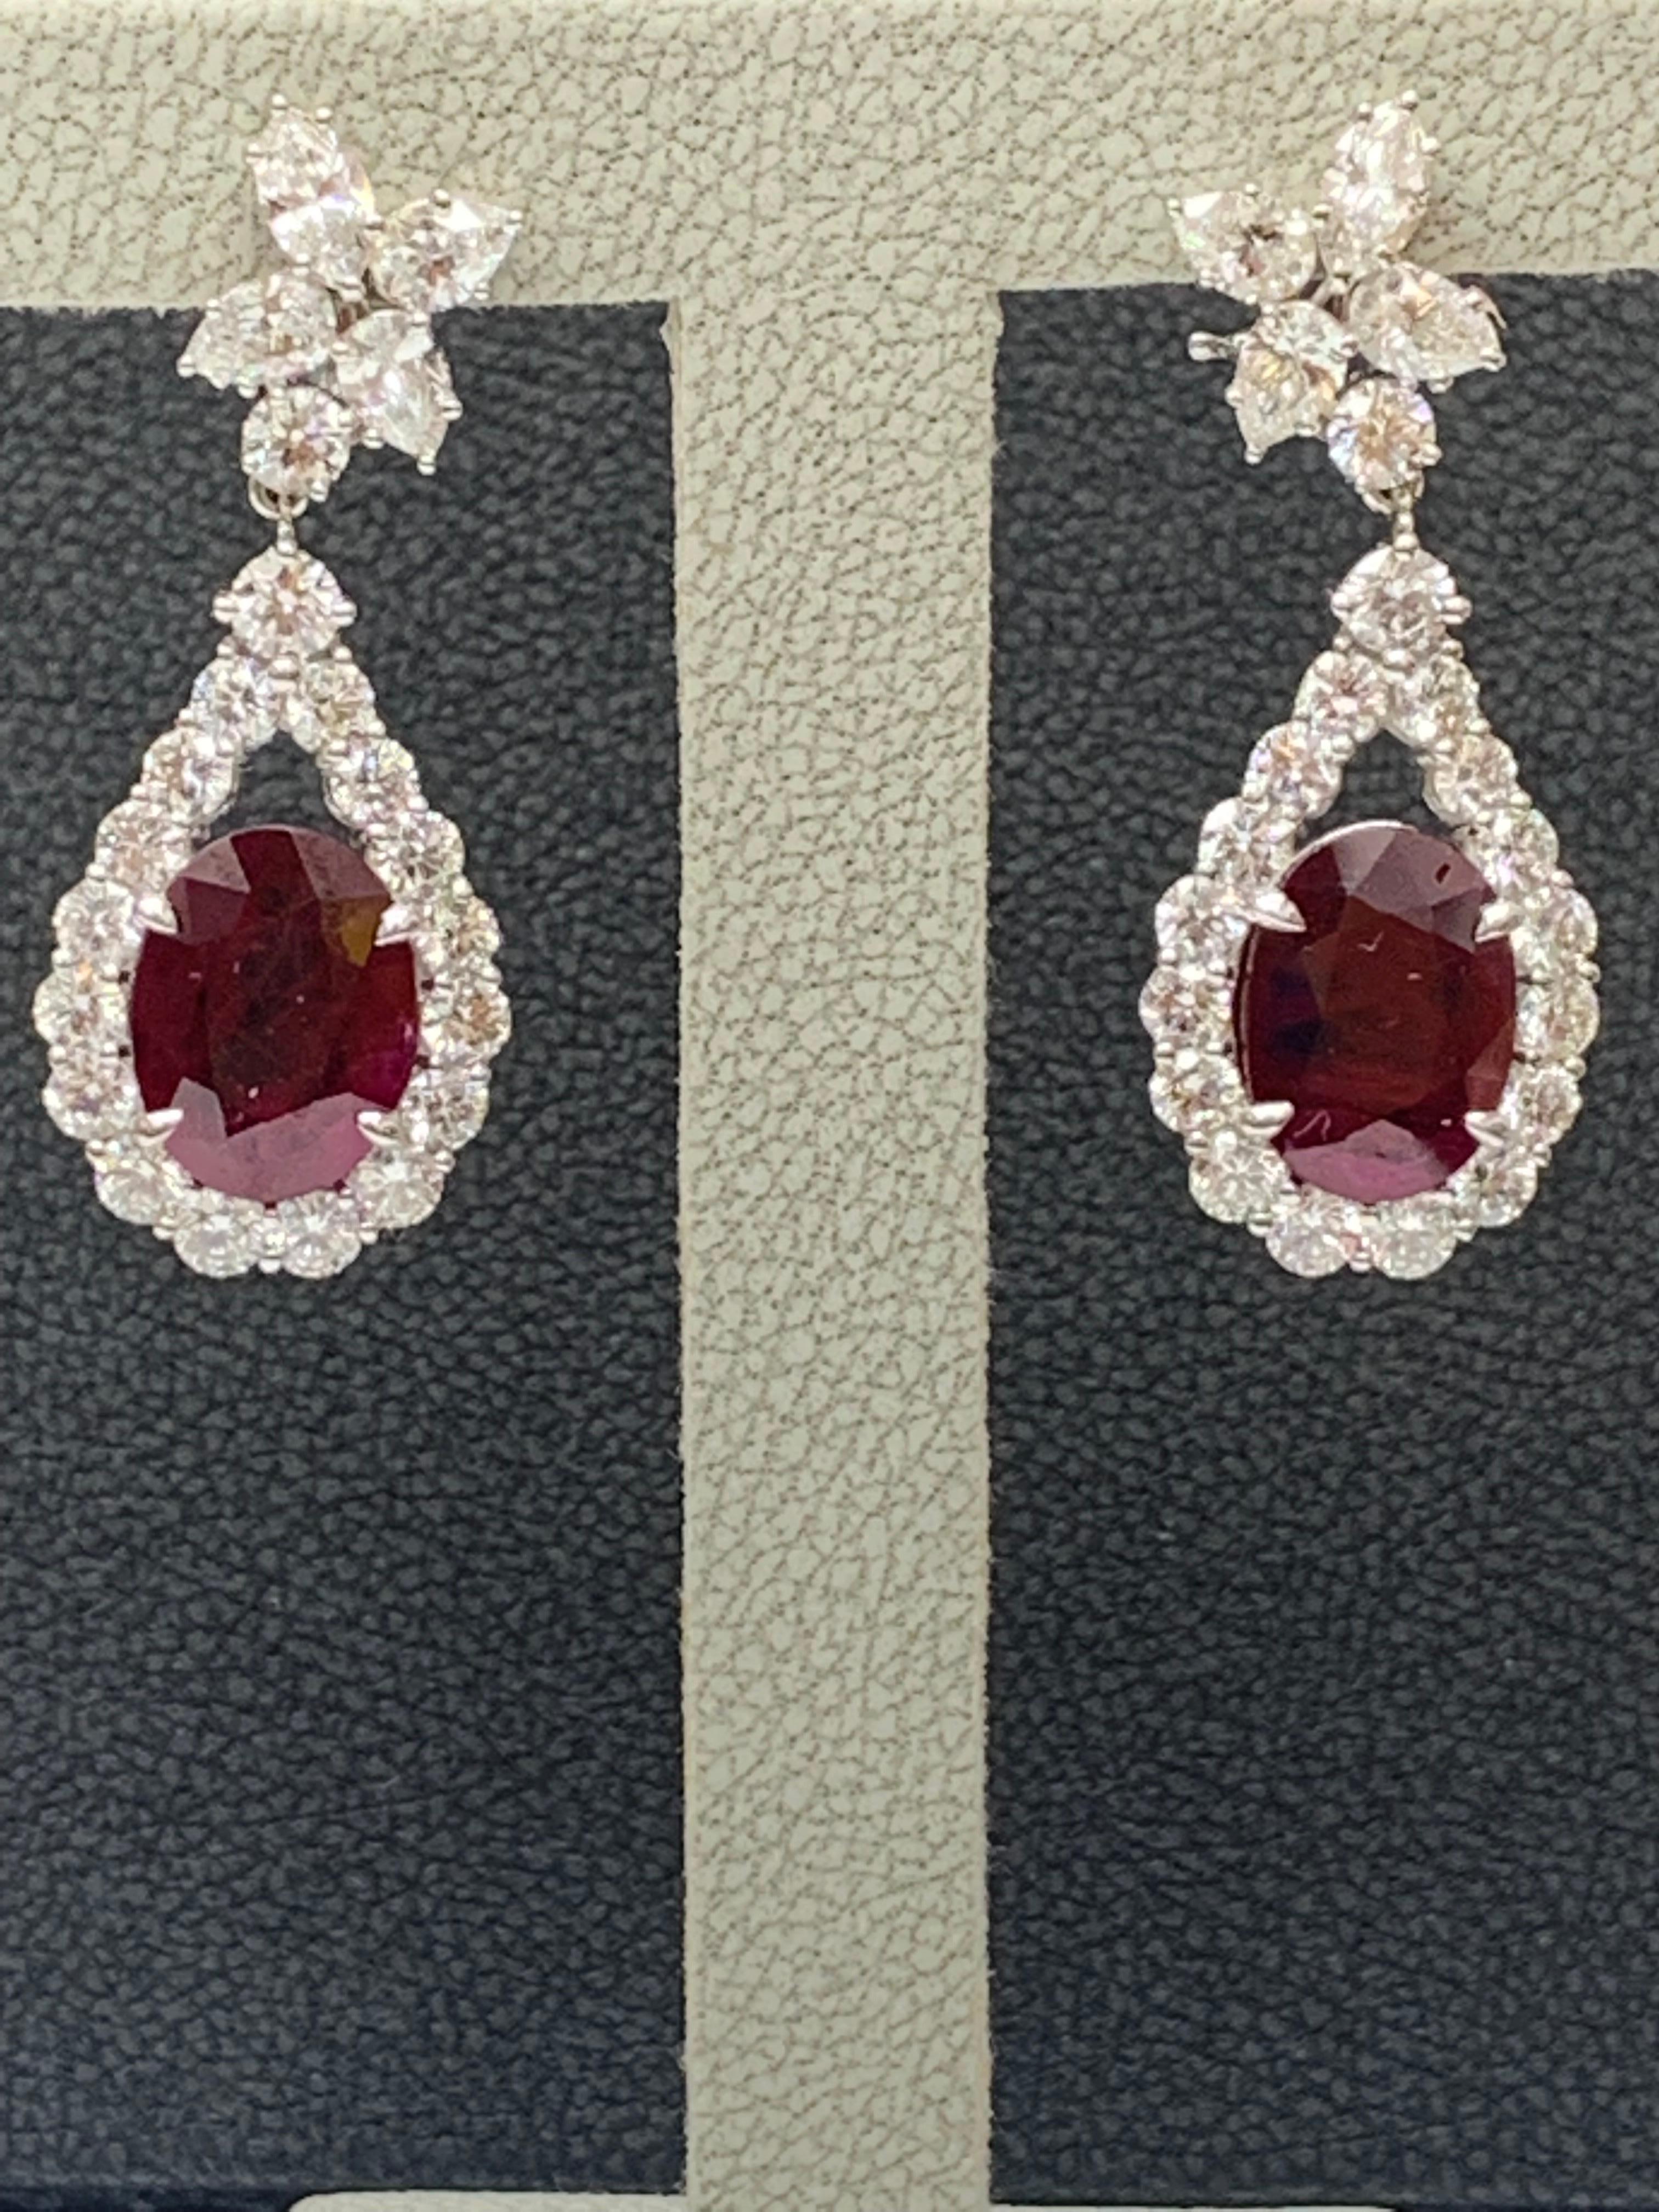 A beautiful and chic pair of drop earrings showcasing a cluster of brilliant mixed-cut diamonds, and an oval brilliant-cut Rubies set in an intricate and stylish design. 8 Mixed cut Diamonds weigh 1.62 carats in total. 2 rubies weigh 6.81 carats in